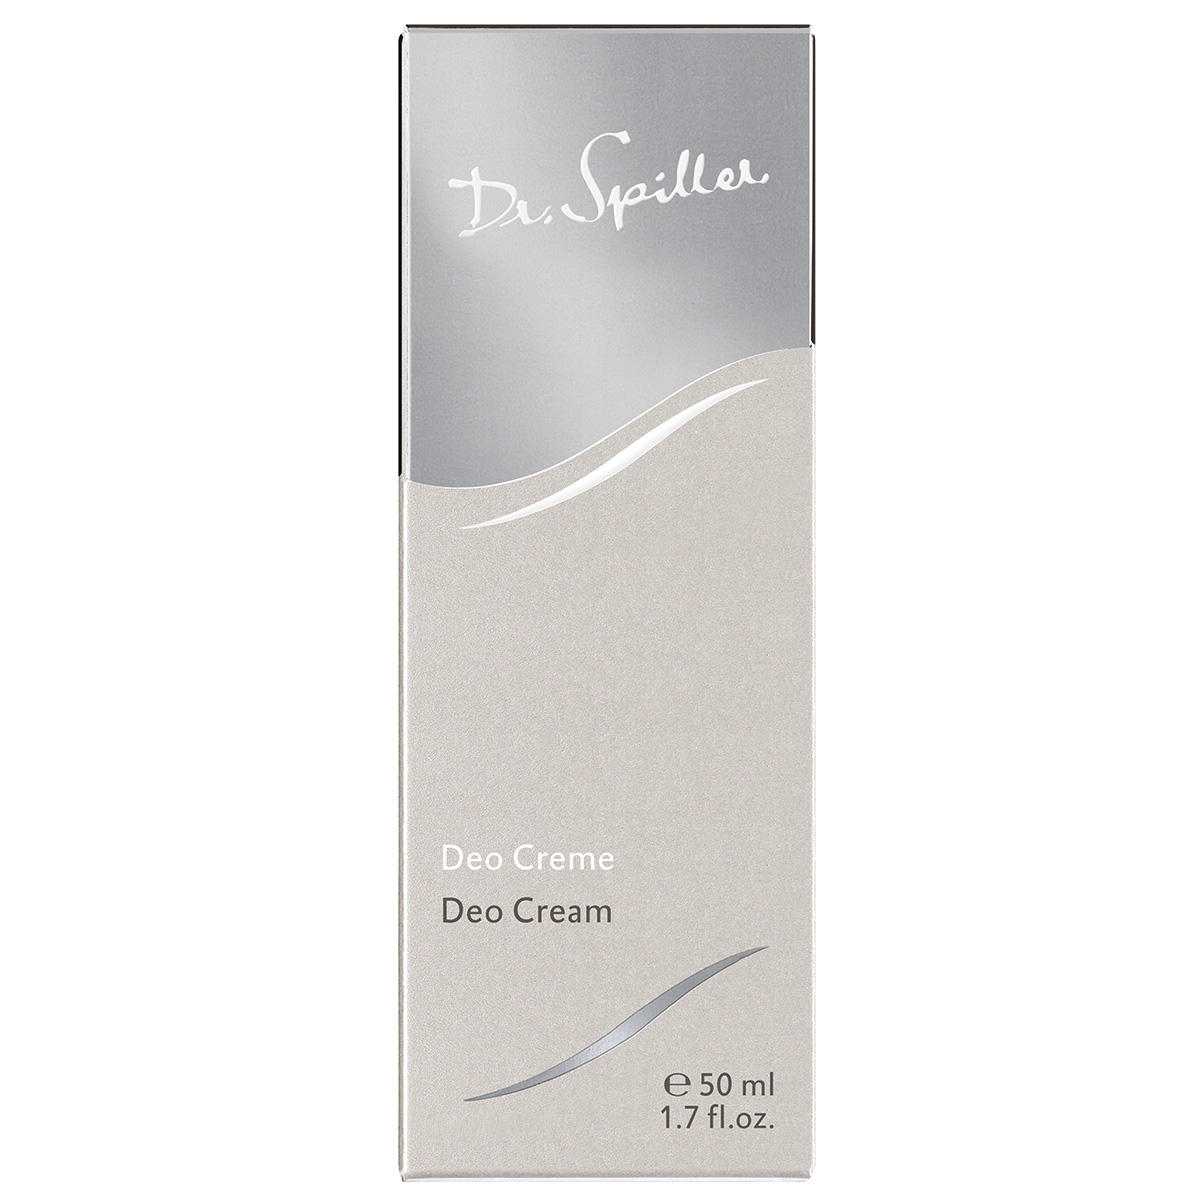 Dr. Spiller Biomimetic SkinCare Deo Creme 50 ml - 3